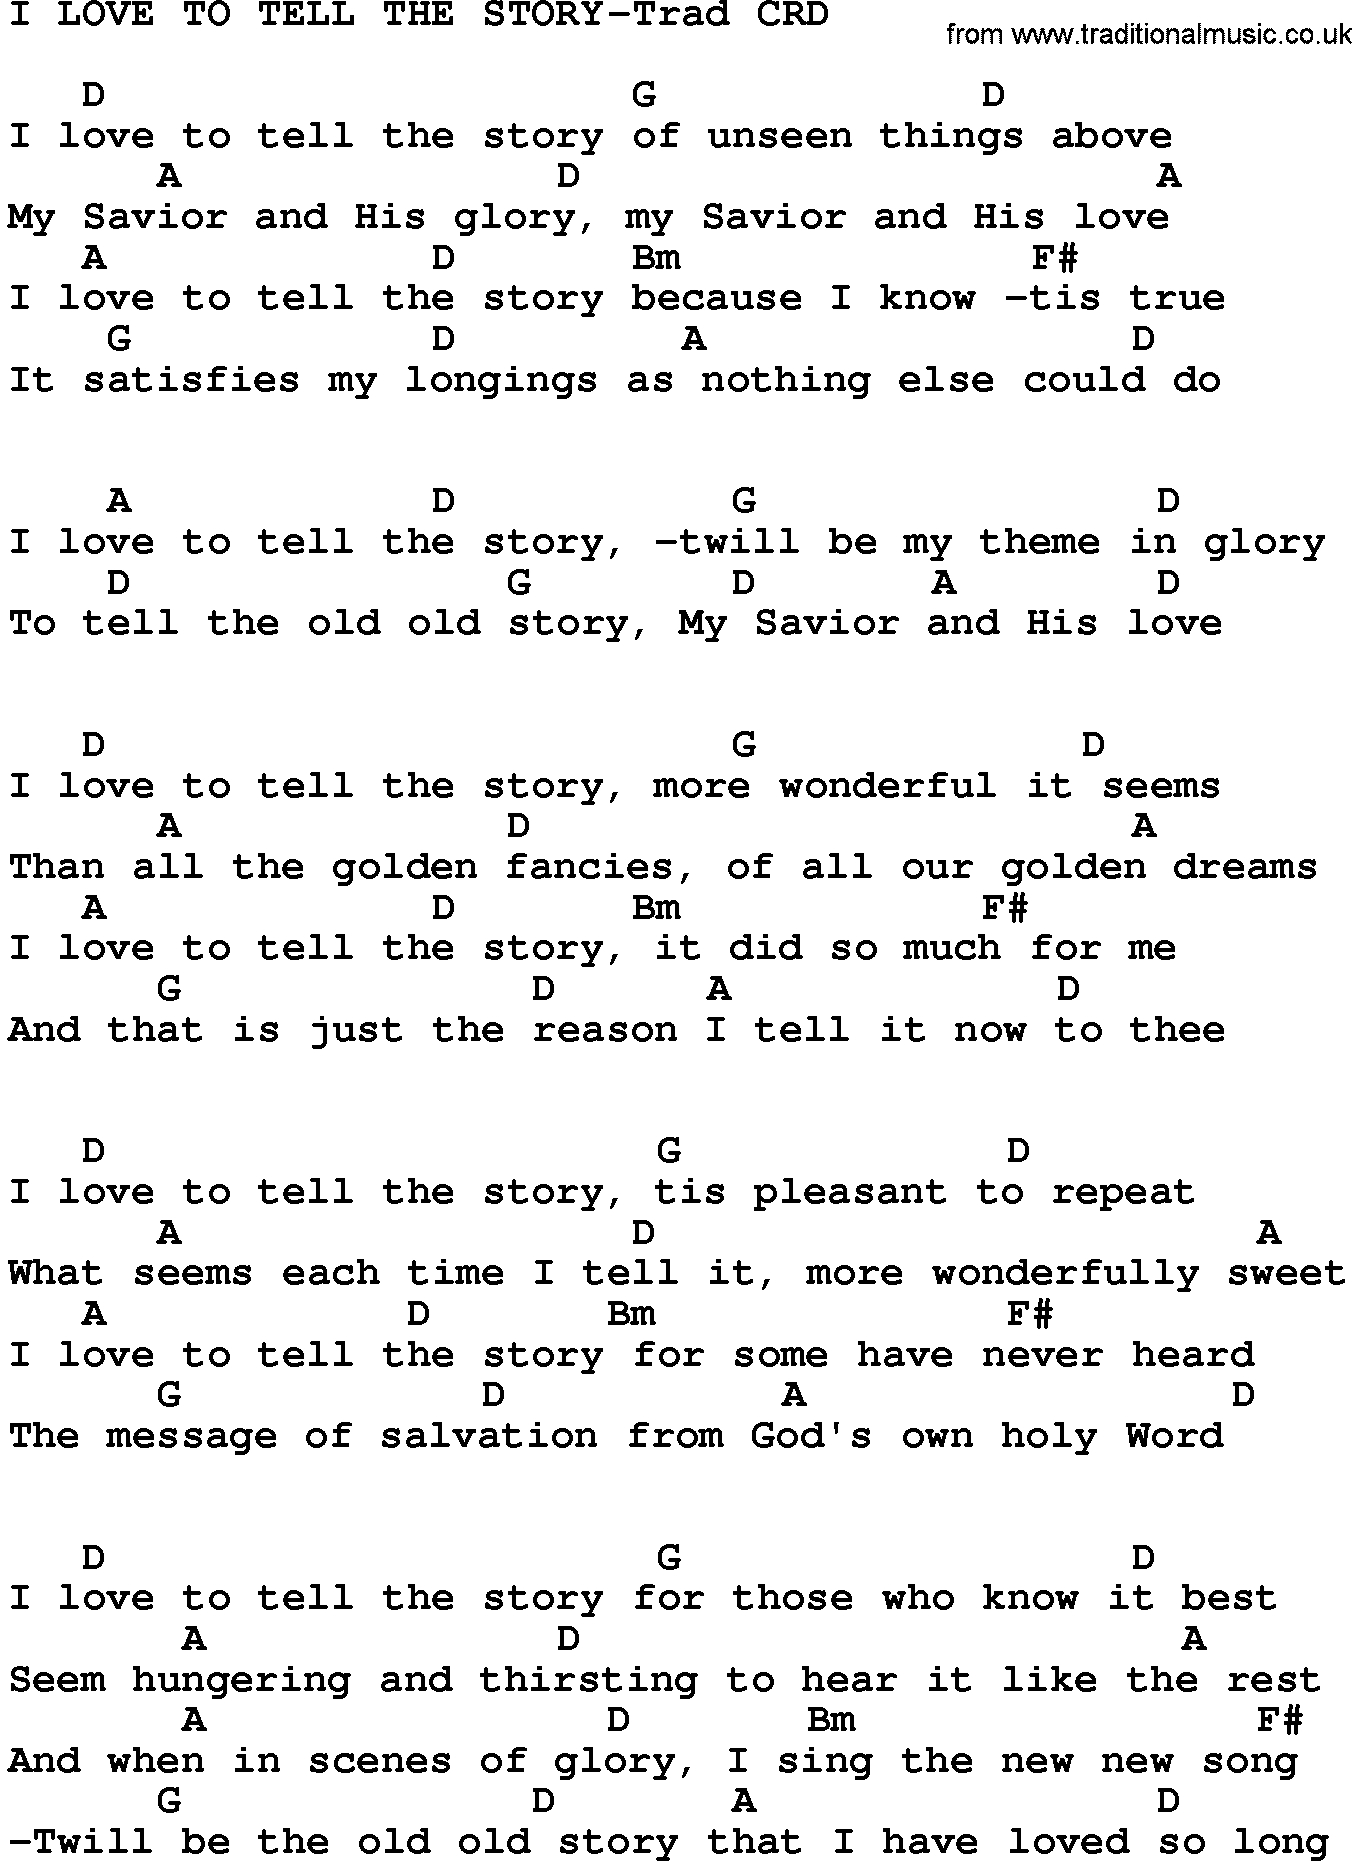 Love Story Chords Gospel Song I Love To Tell The Story Trad Lyrics And Chords